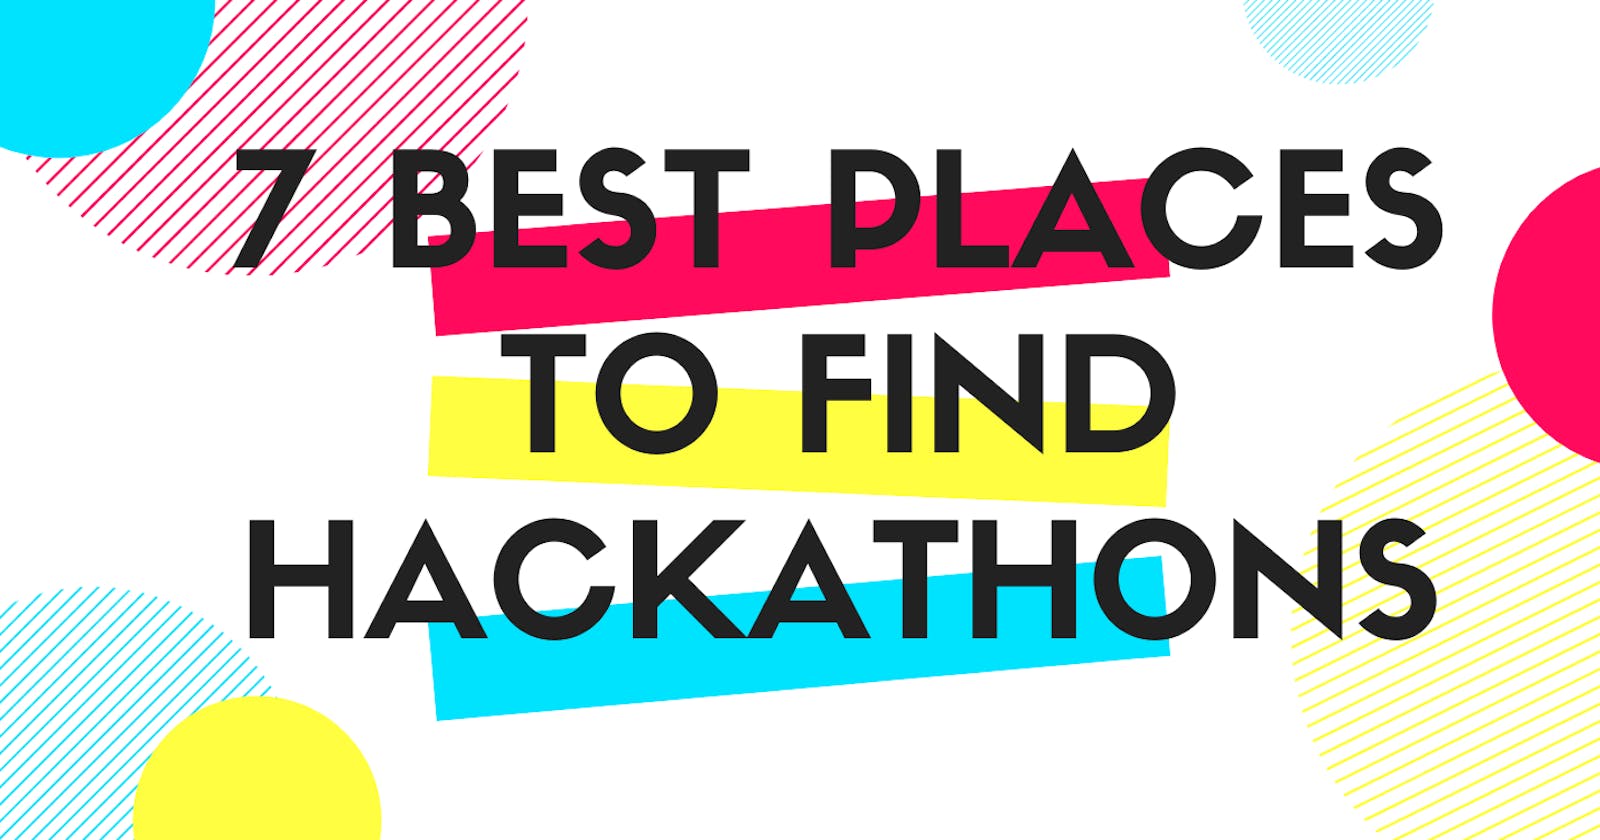 7 Best Places to find Hackathons!👩‍💻